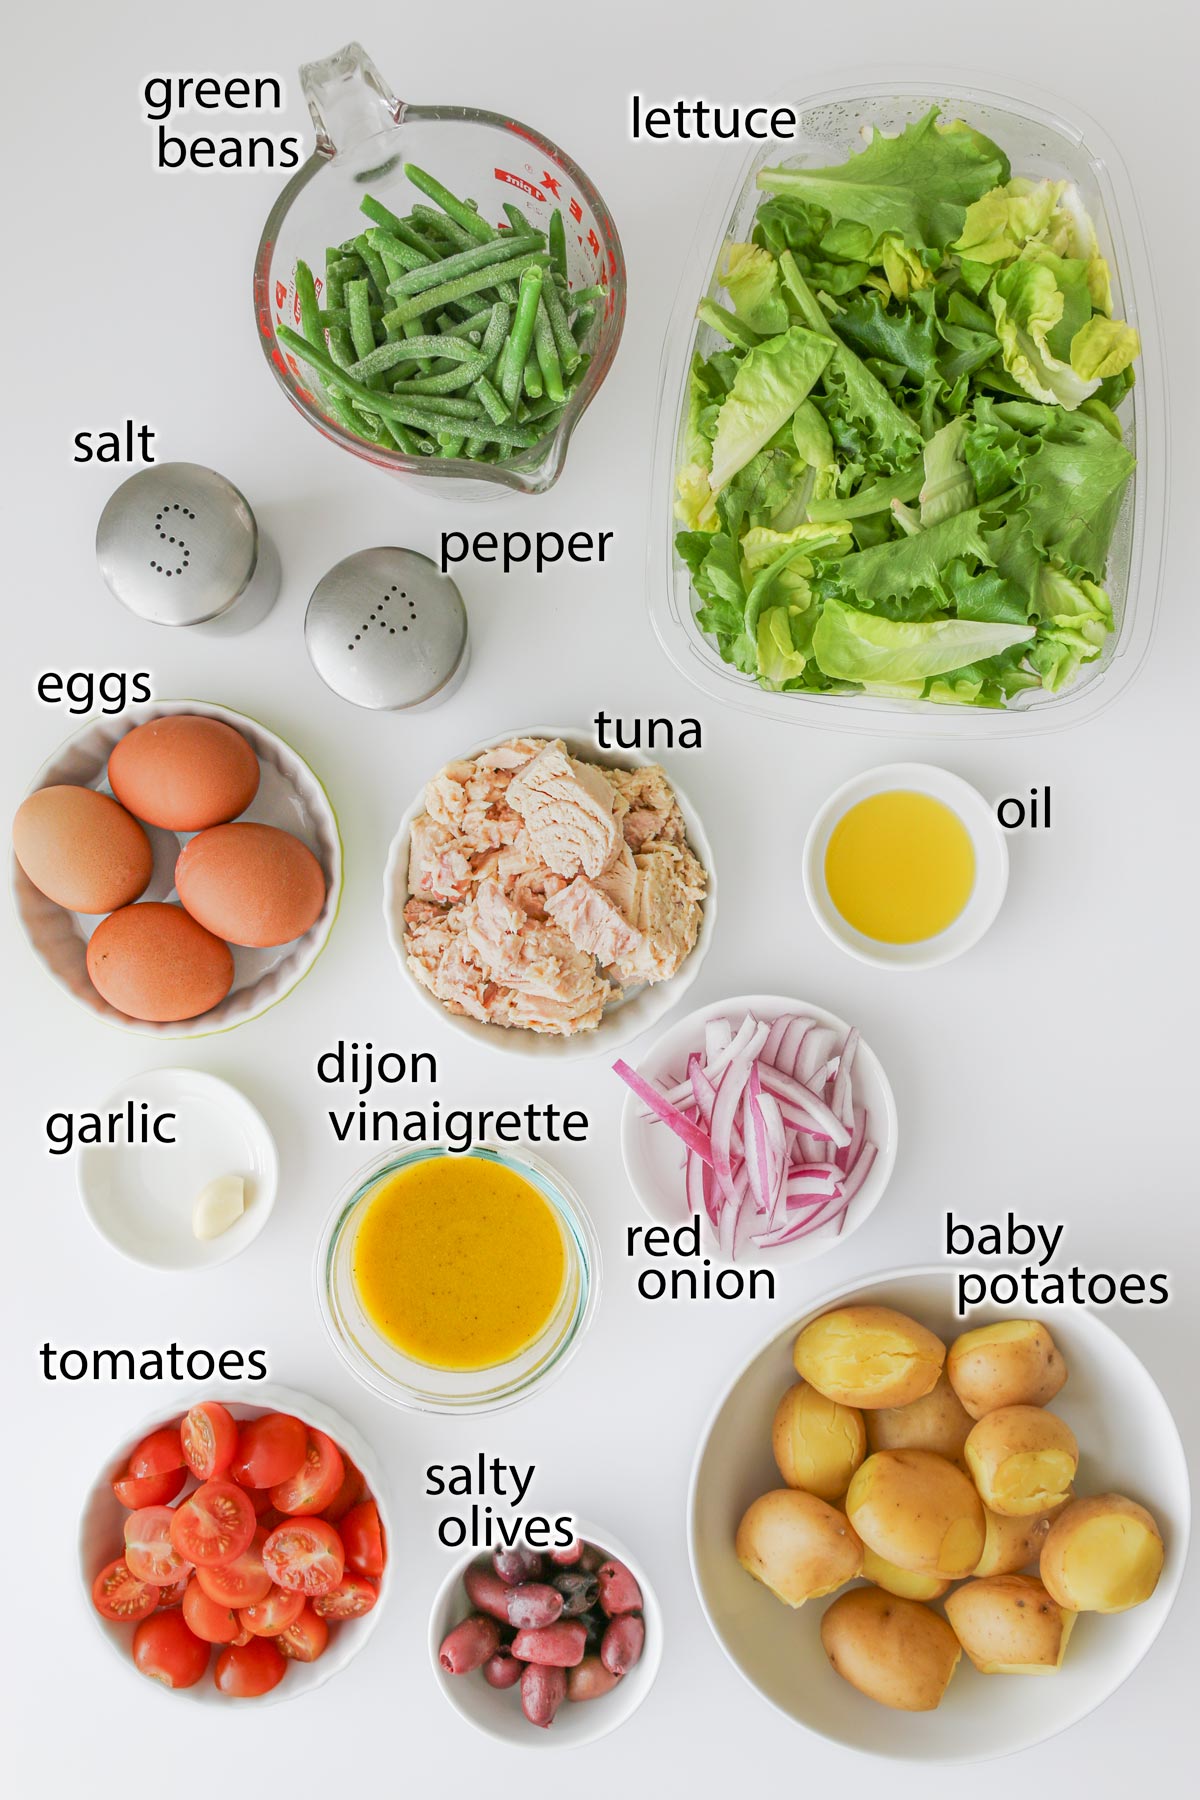 ingredients for salade nicoise laid out on a white counter.